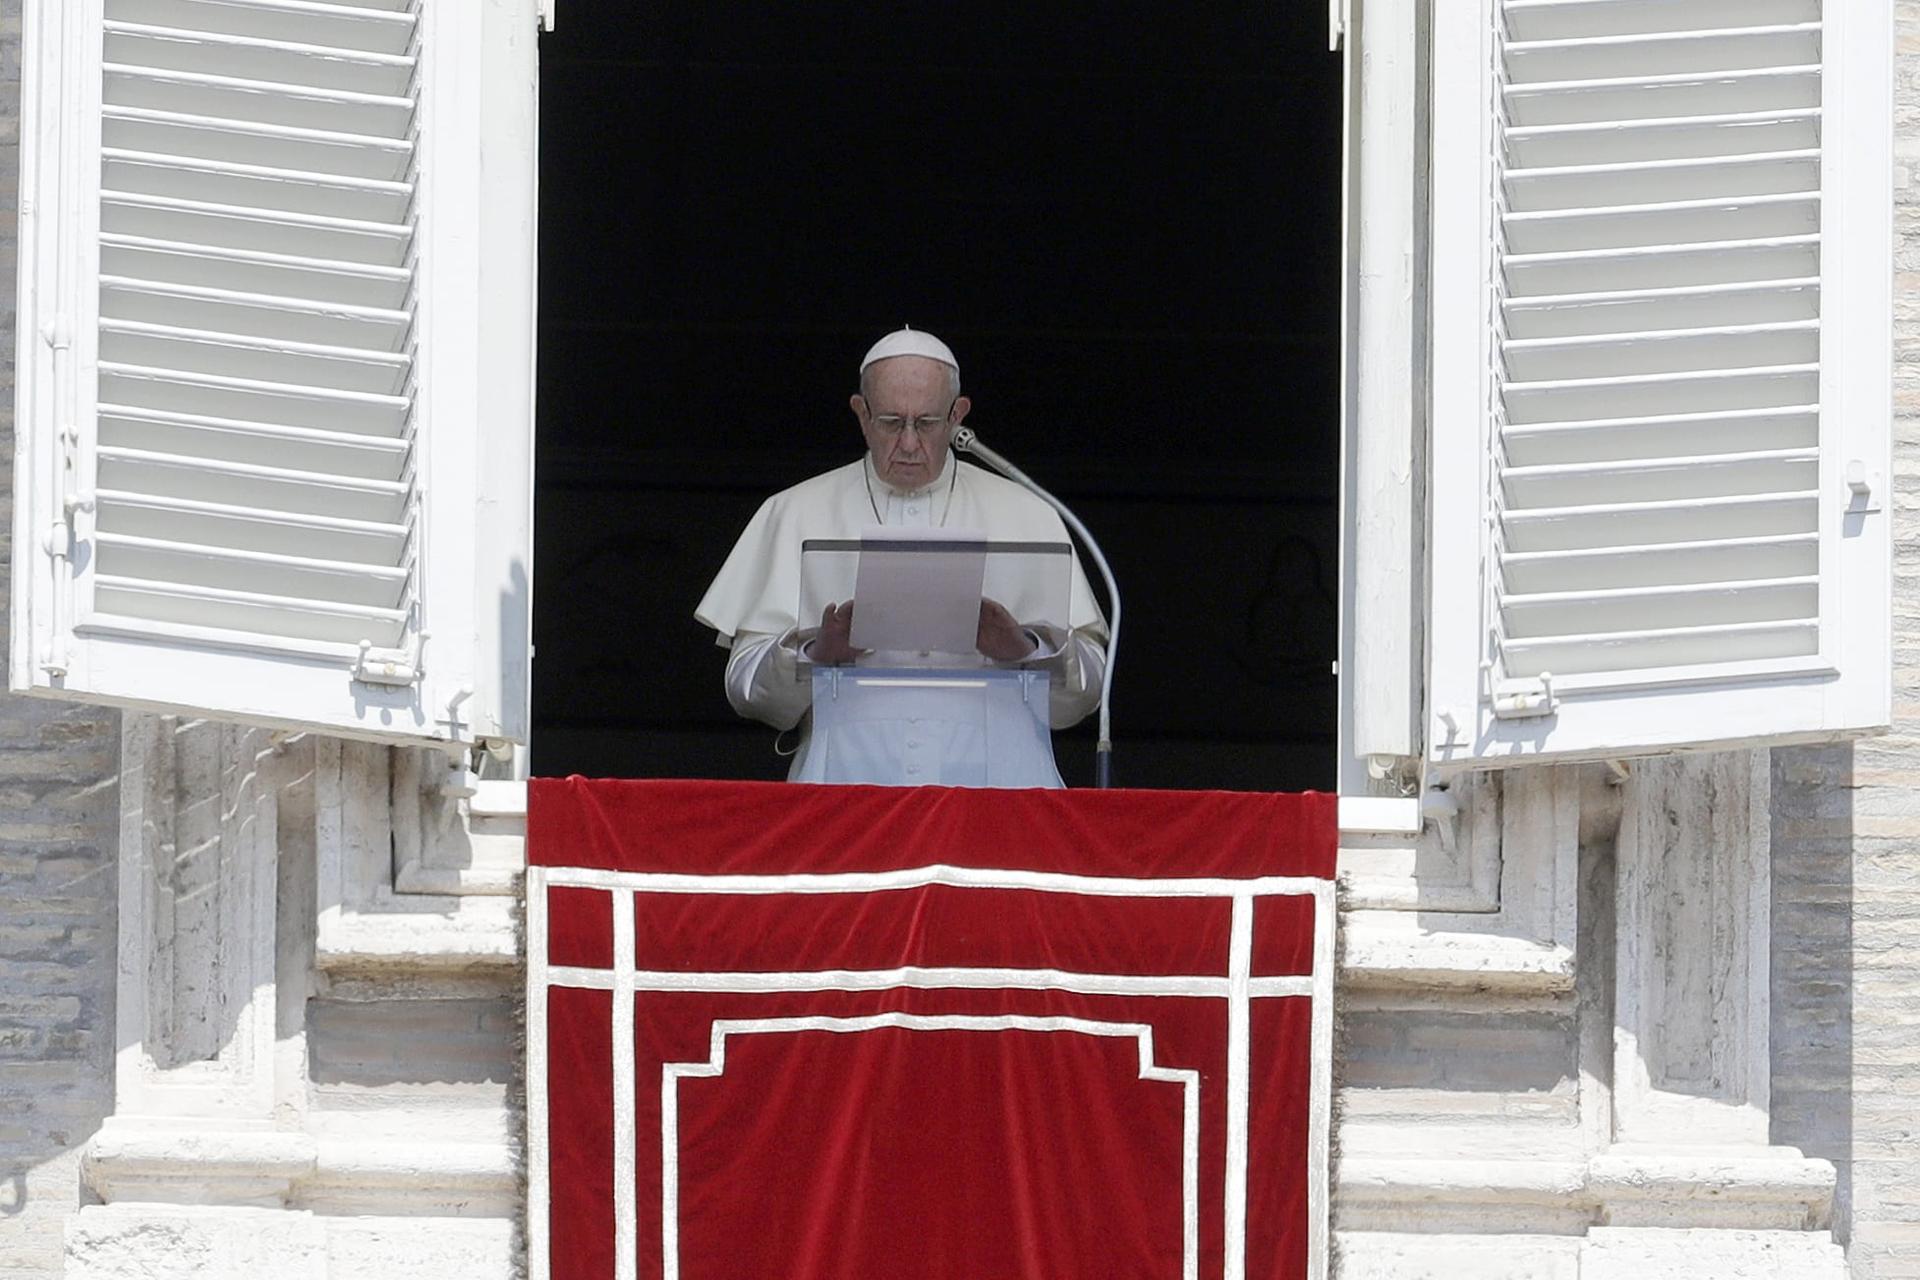 Accountability for abuse cover-ups may be acid test for pope’s Irish trip